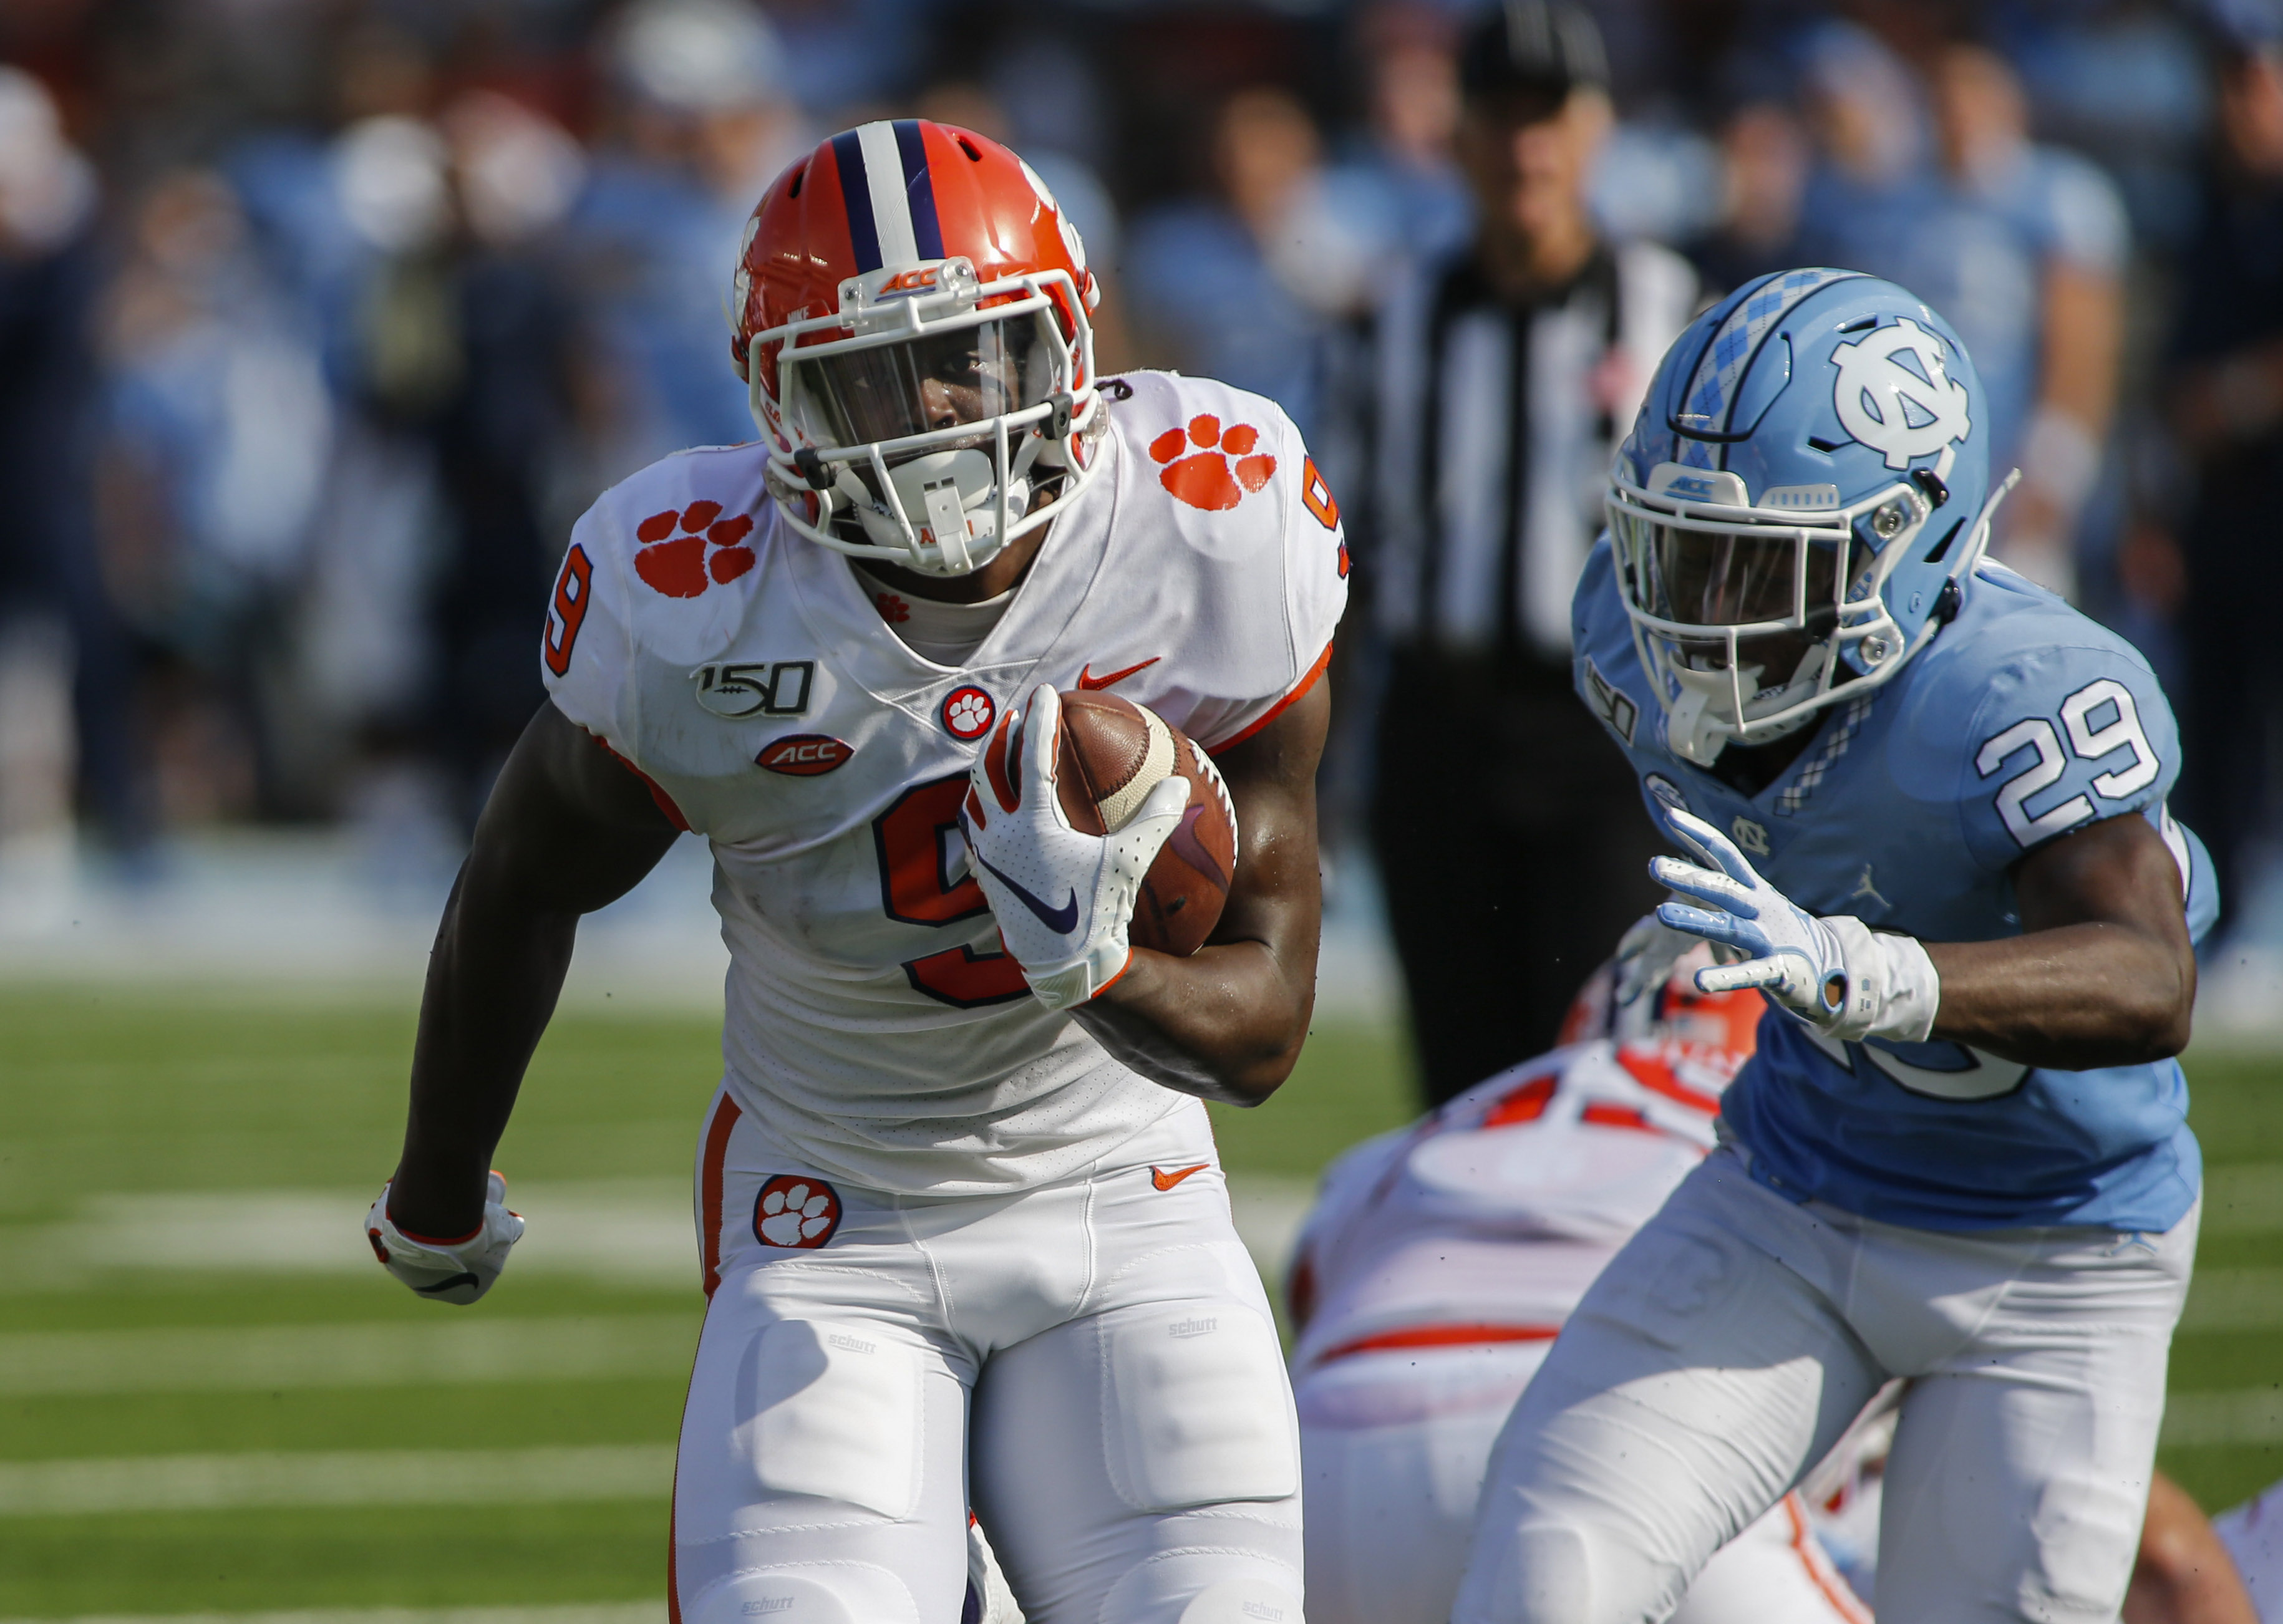 Even without Playoff implications, ACC title game a meaningful matchup